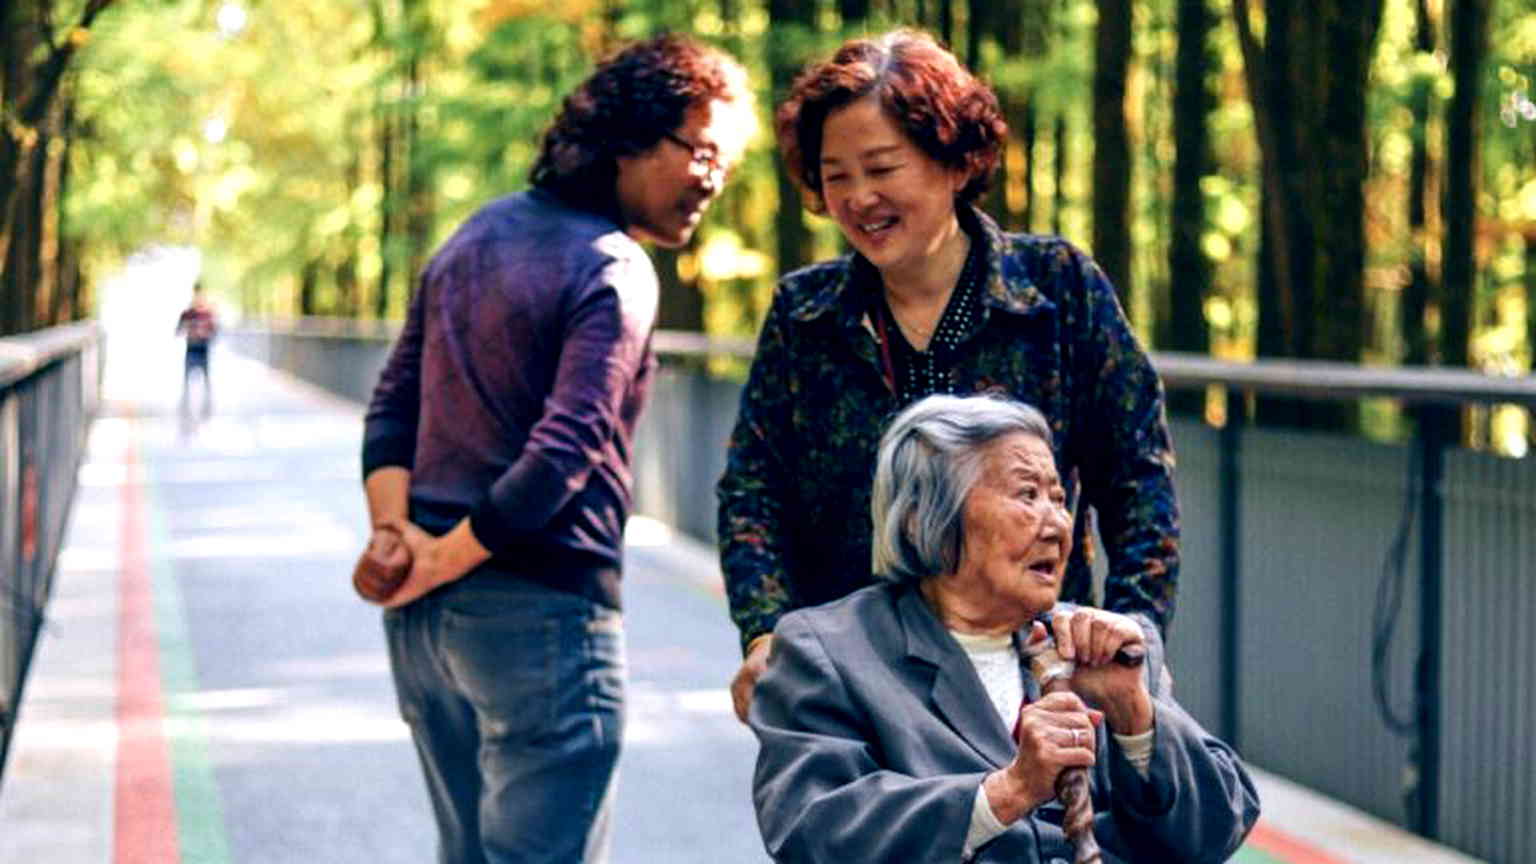 Japan has more centenarians than ever before, with women making up most of the total